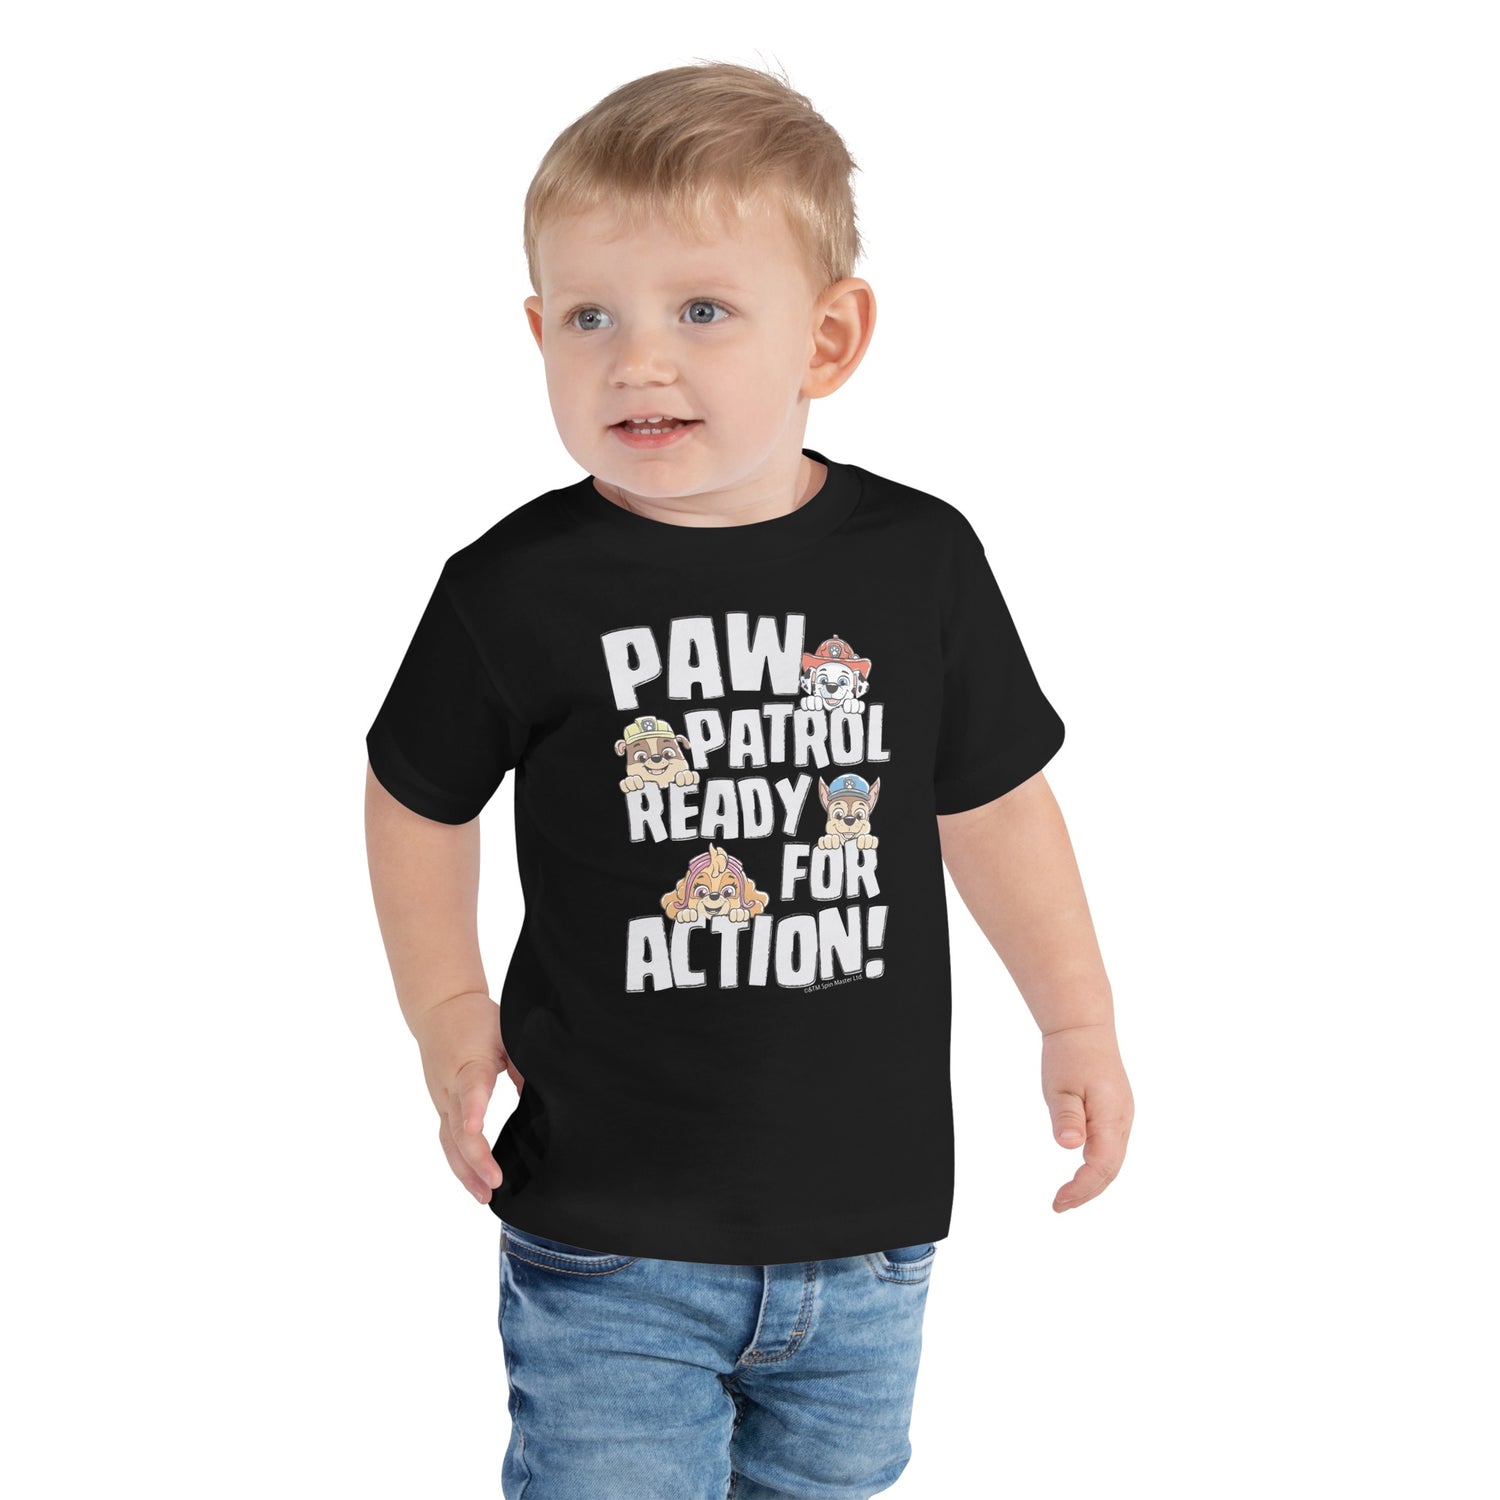 PAW Patrol Ready For Action Toddler Short Sleeve T-Shirt